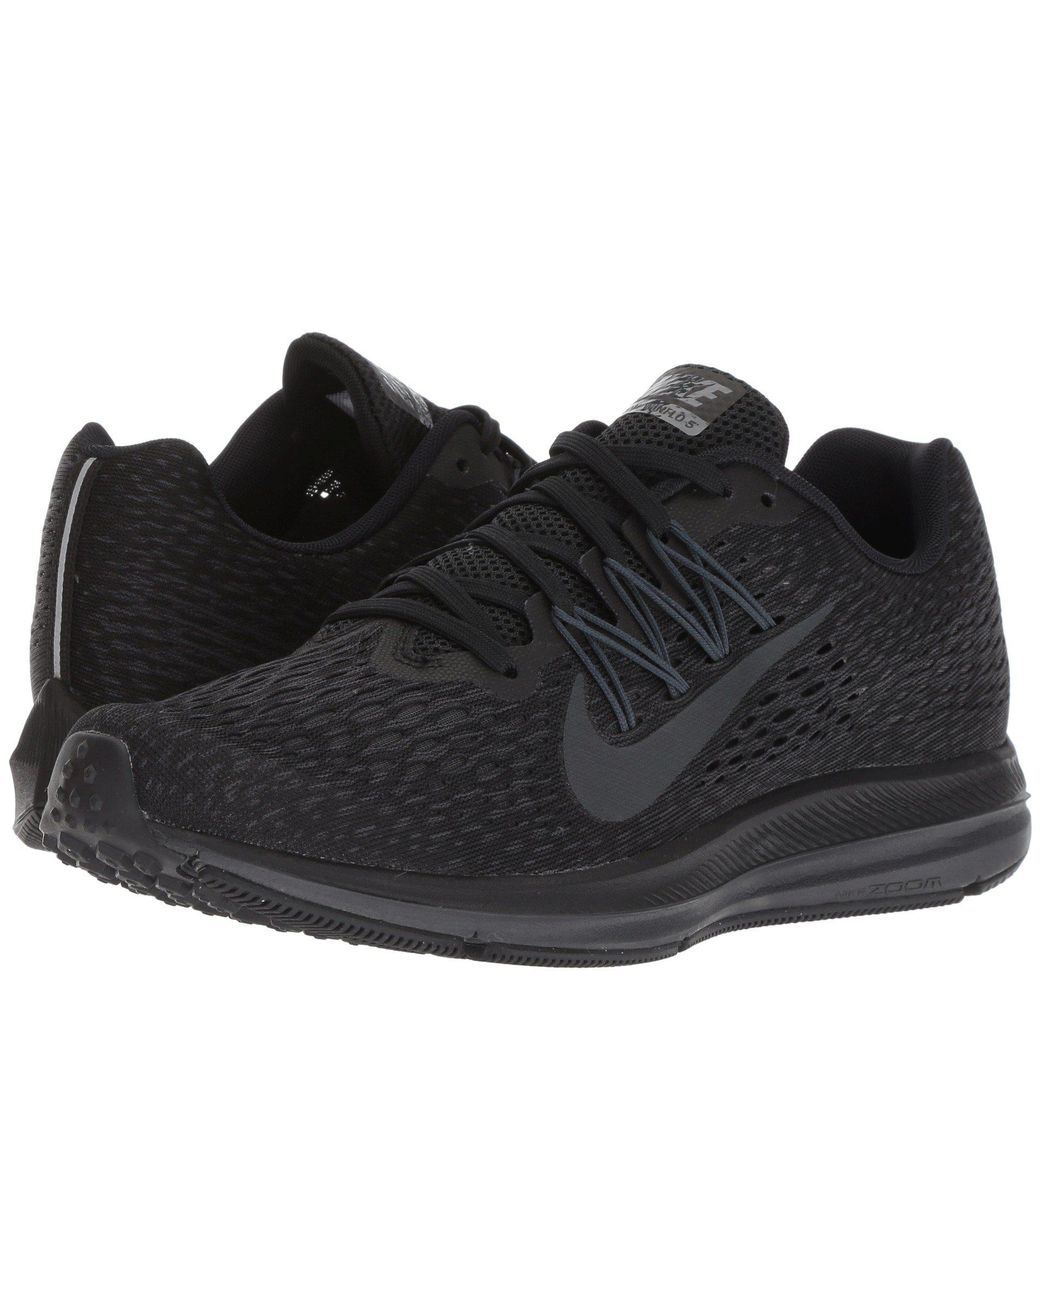 Nike Women's Air Zoom Winflo 5 (black/anthracite) Running Shoes